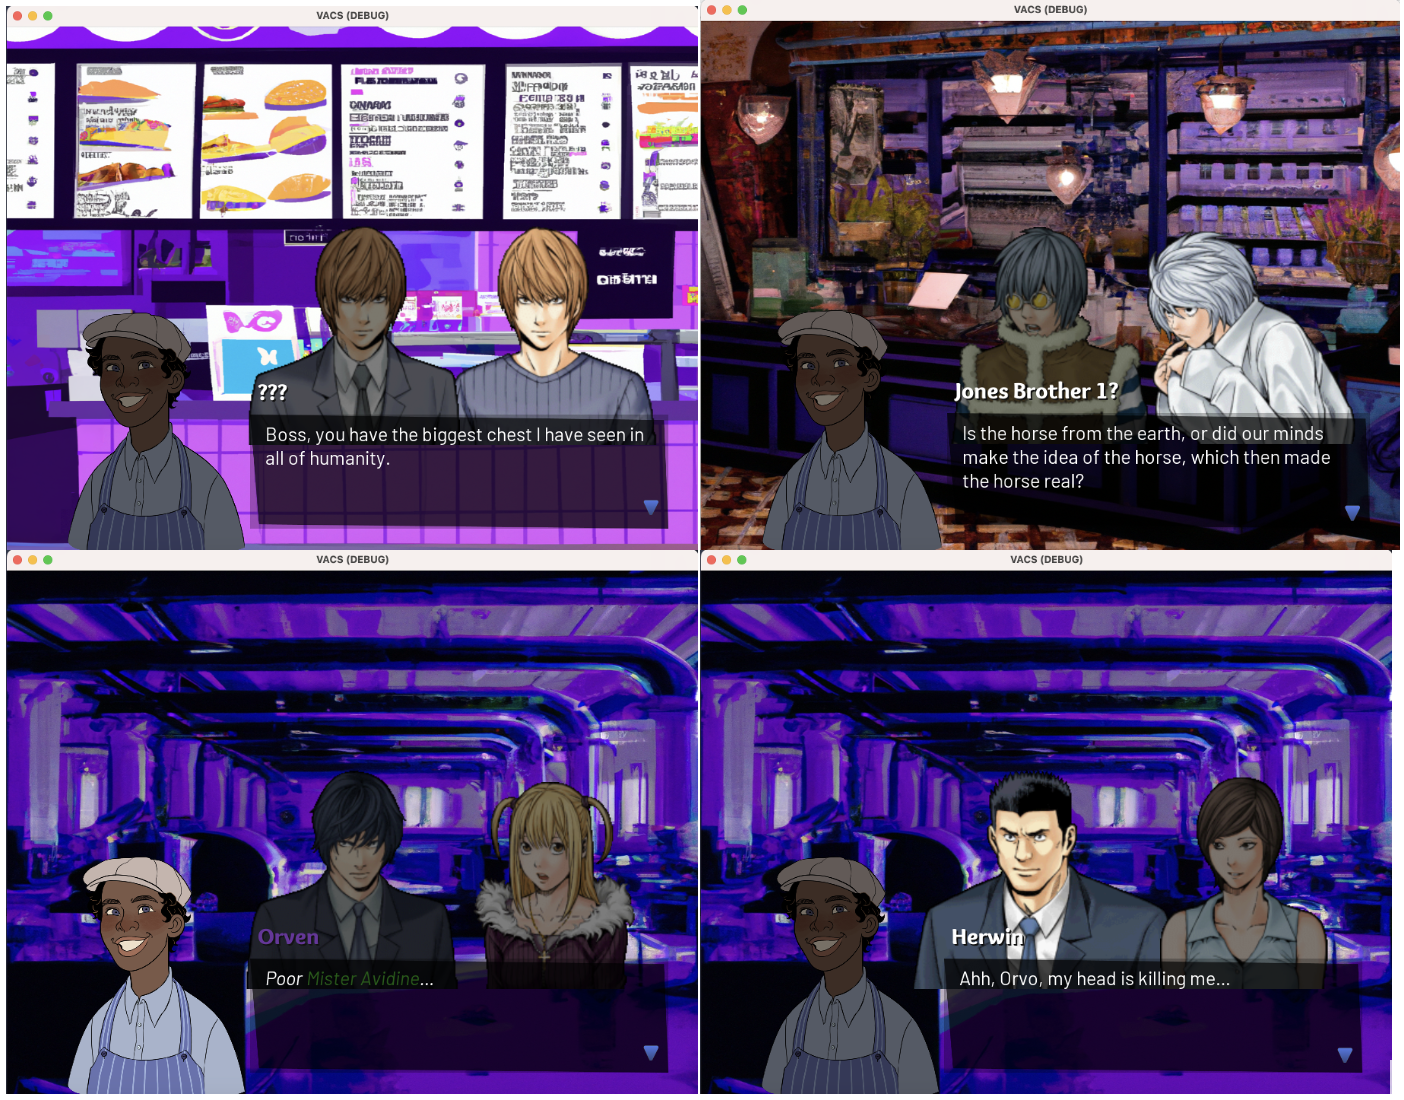 Death Note Cameos in our demo